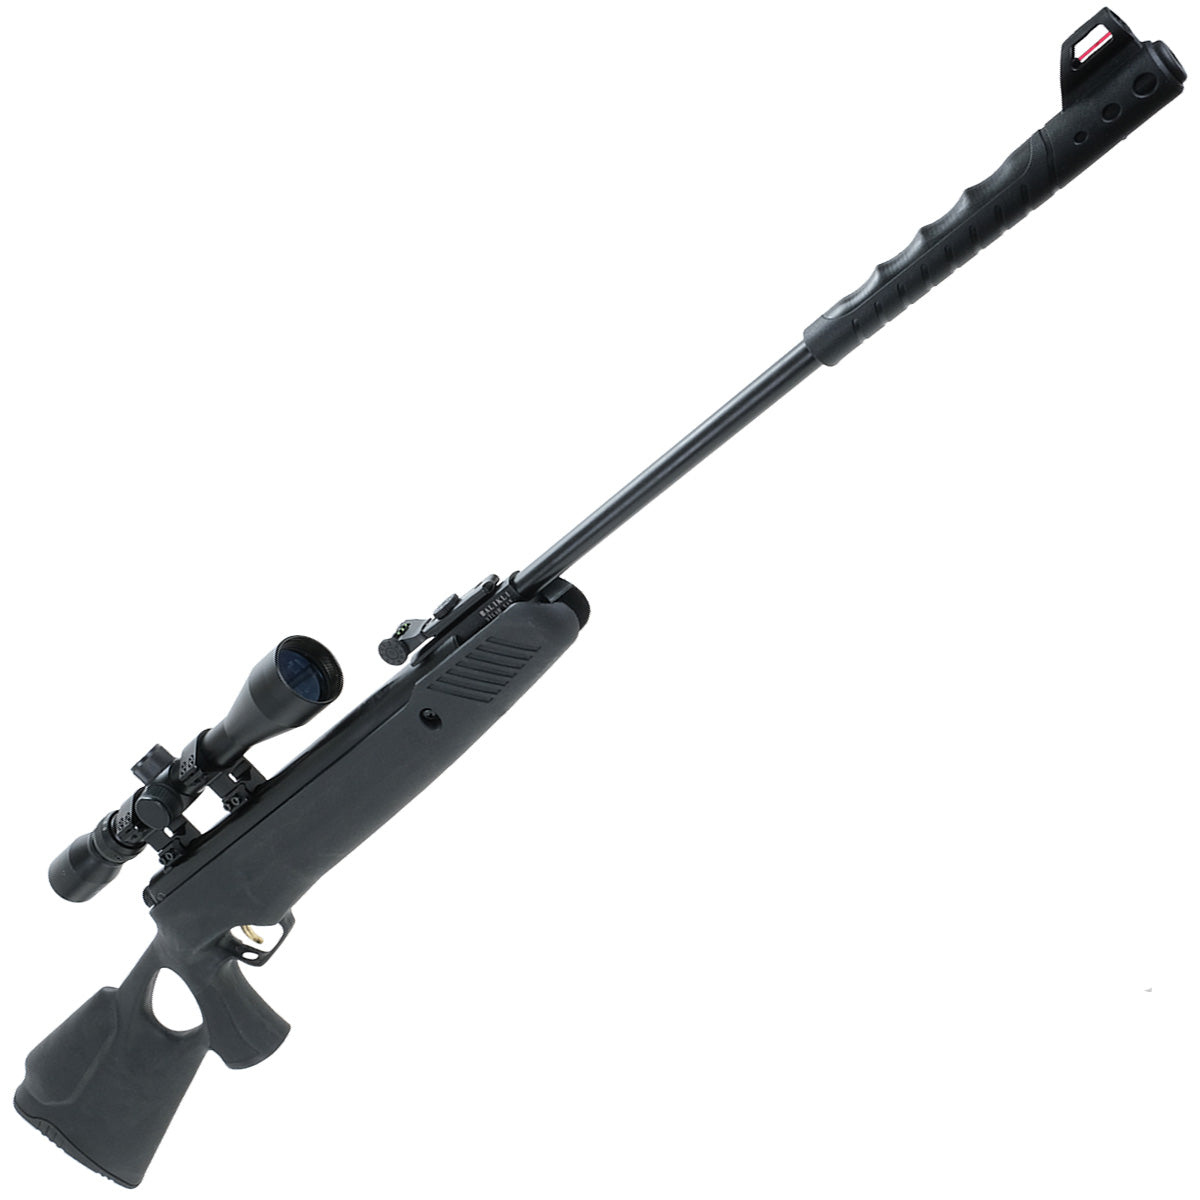 SALIX, TRIMEX ARMS TX04 BREAK BARREL SPRING AIR RIFLE WITH SYNTHETIC STOCK .22